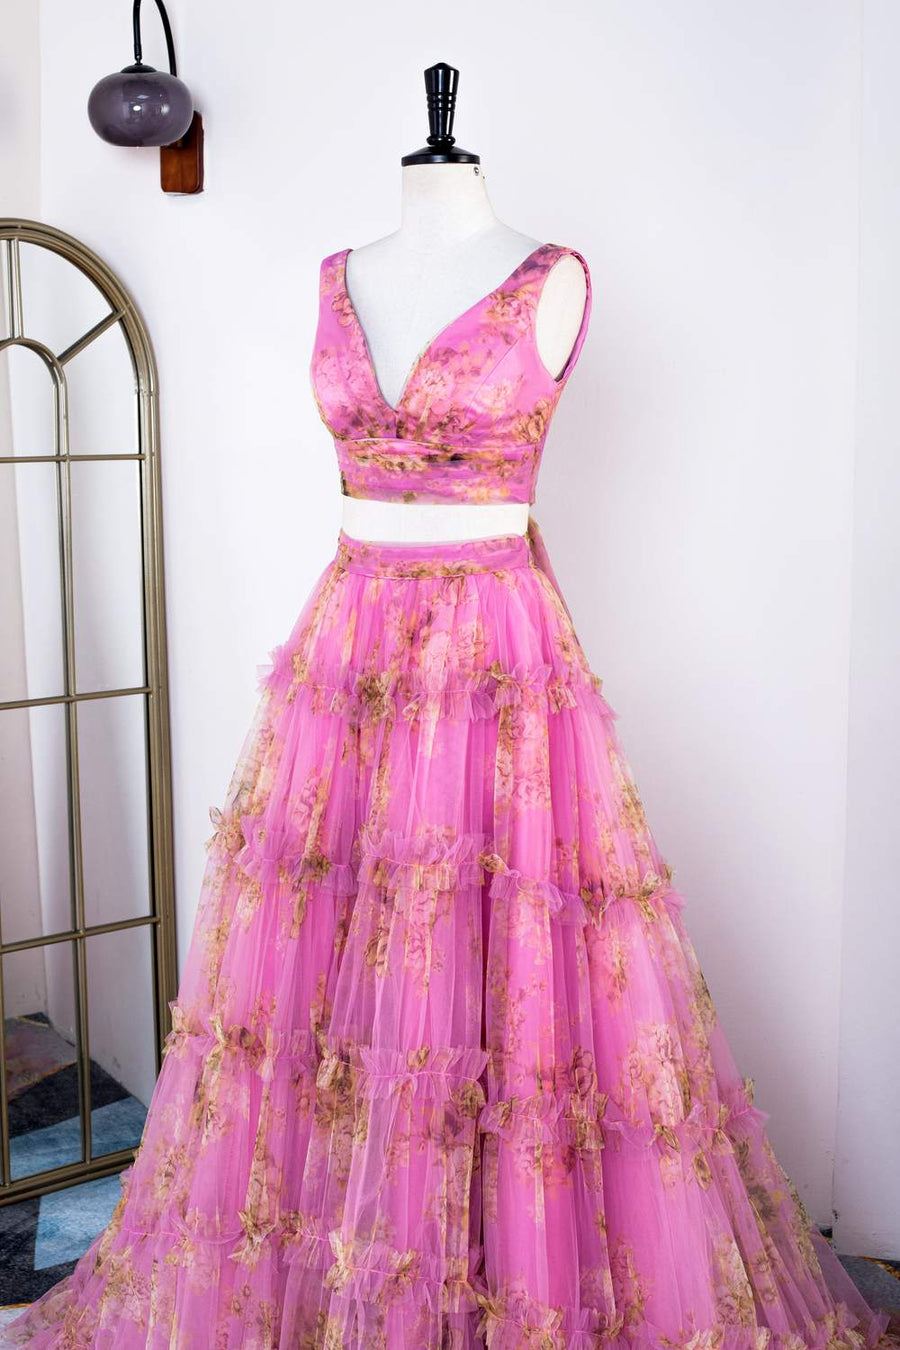 Pink Tow-Piece Ruffled Floral Long Prom Dress